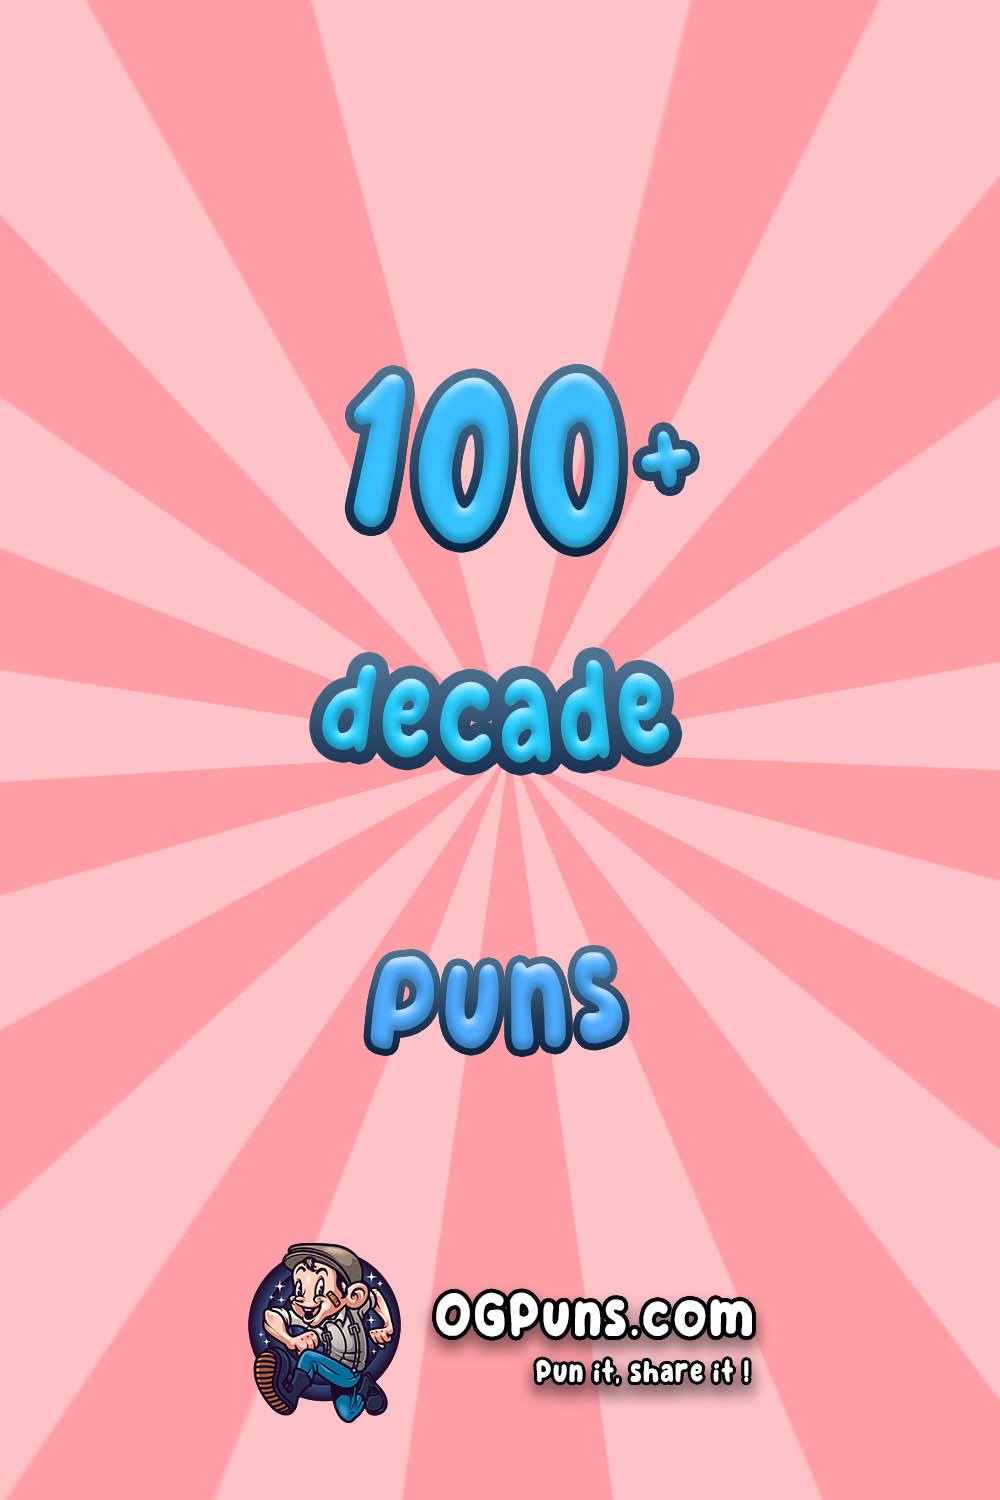 Decade puns Image for Pinterest